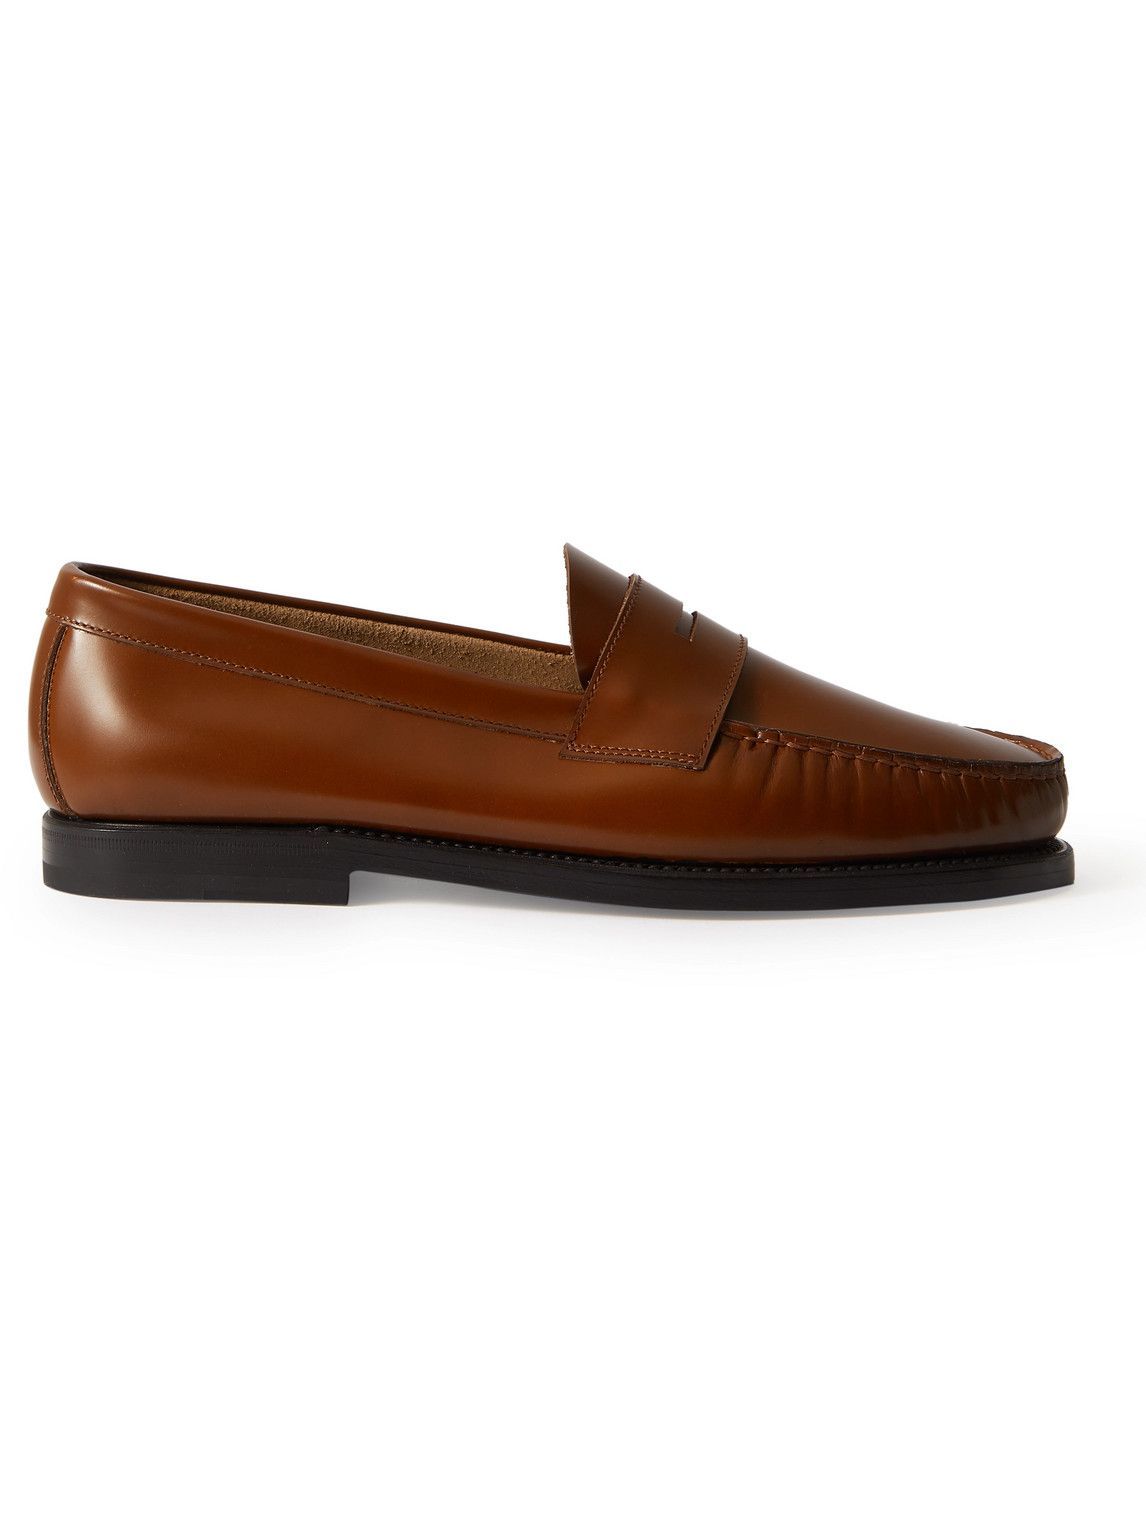 Fear of God - Leather Penny Loafers - Brown Fear Of God